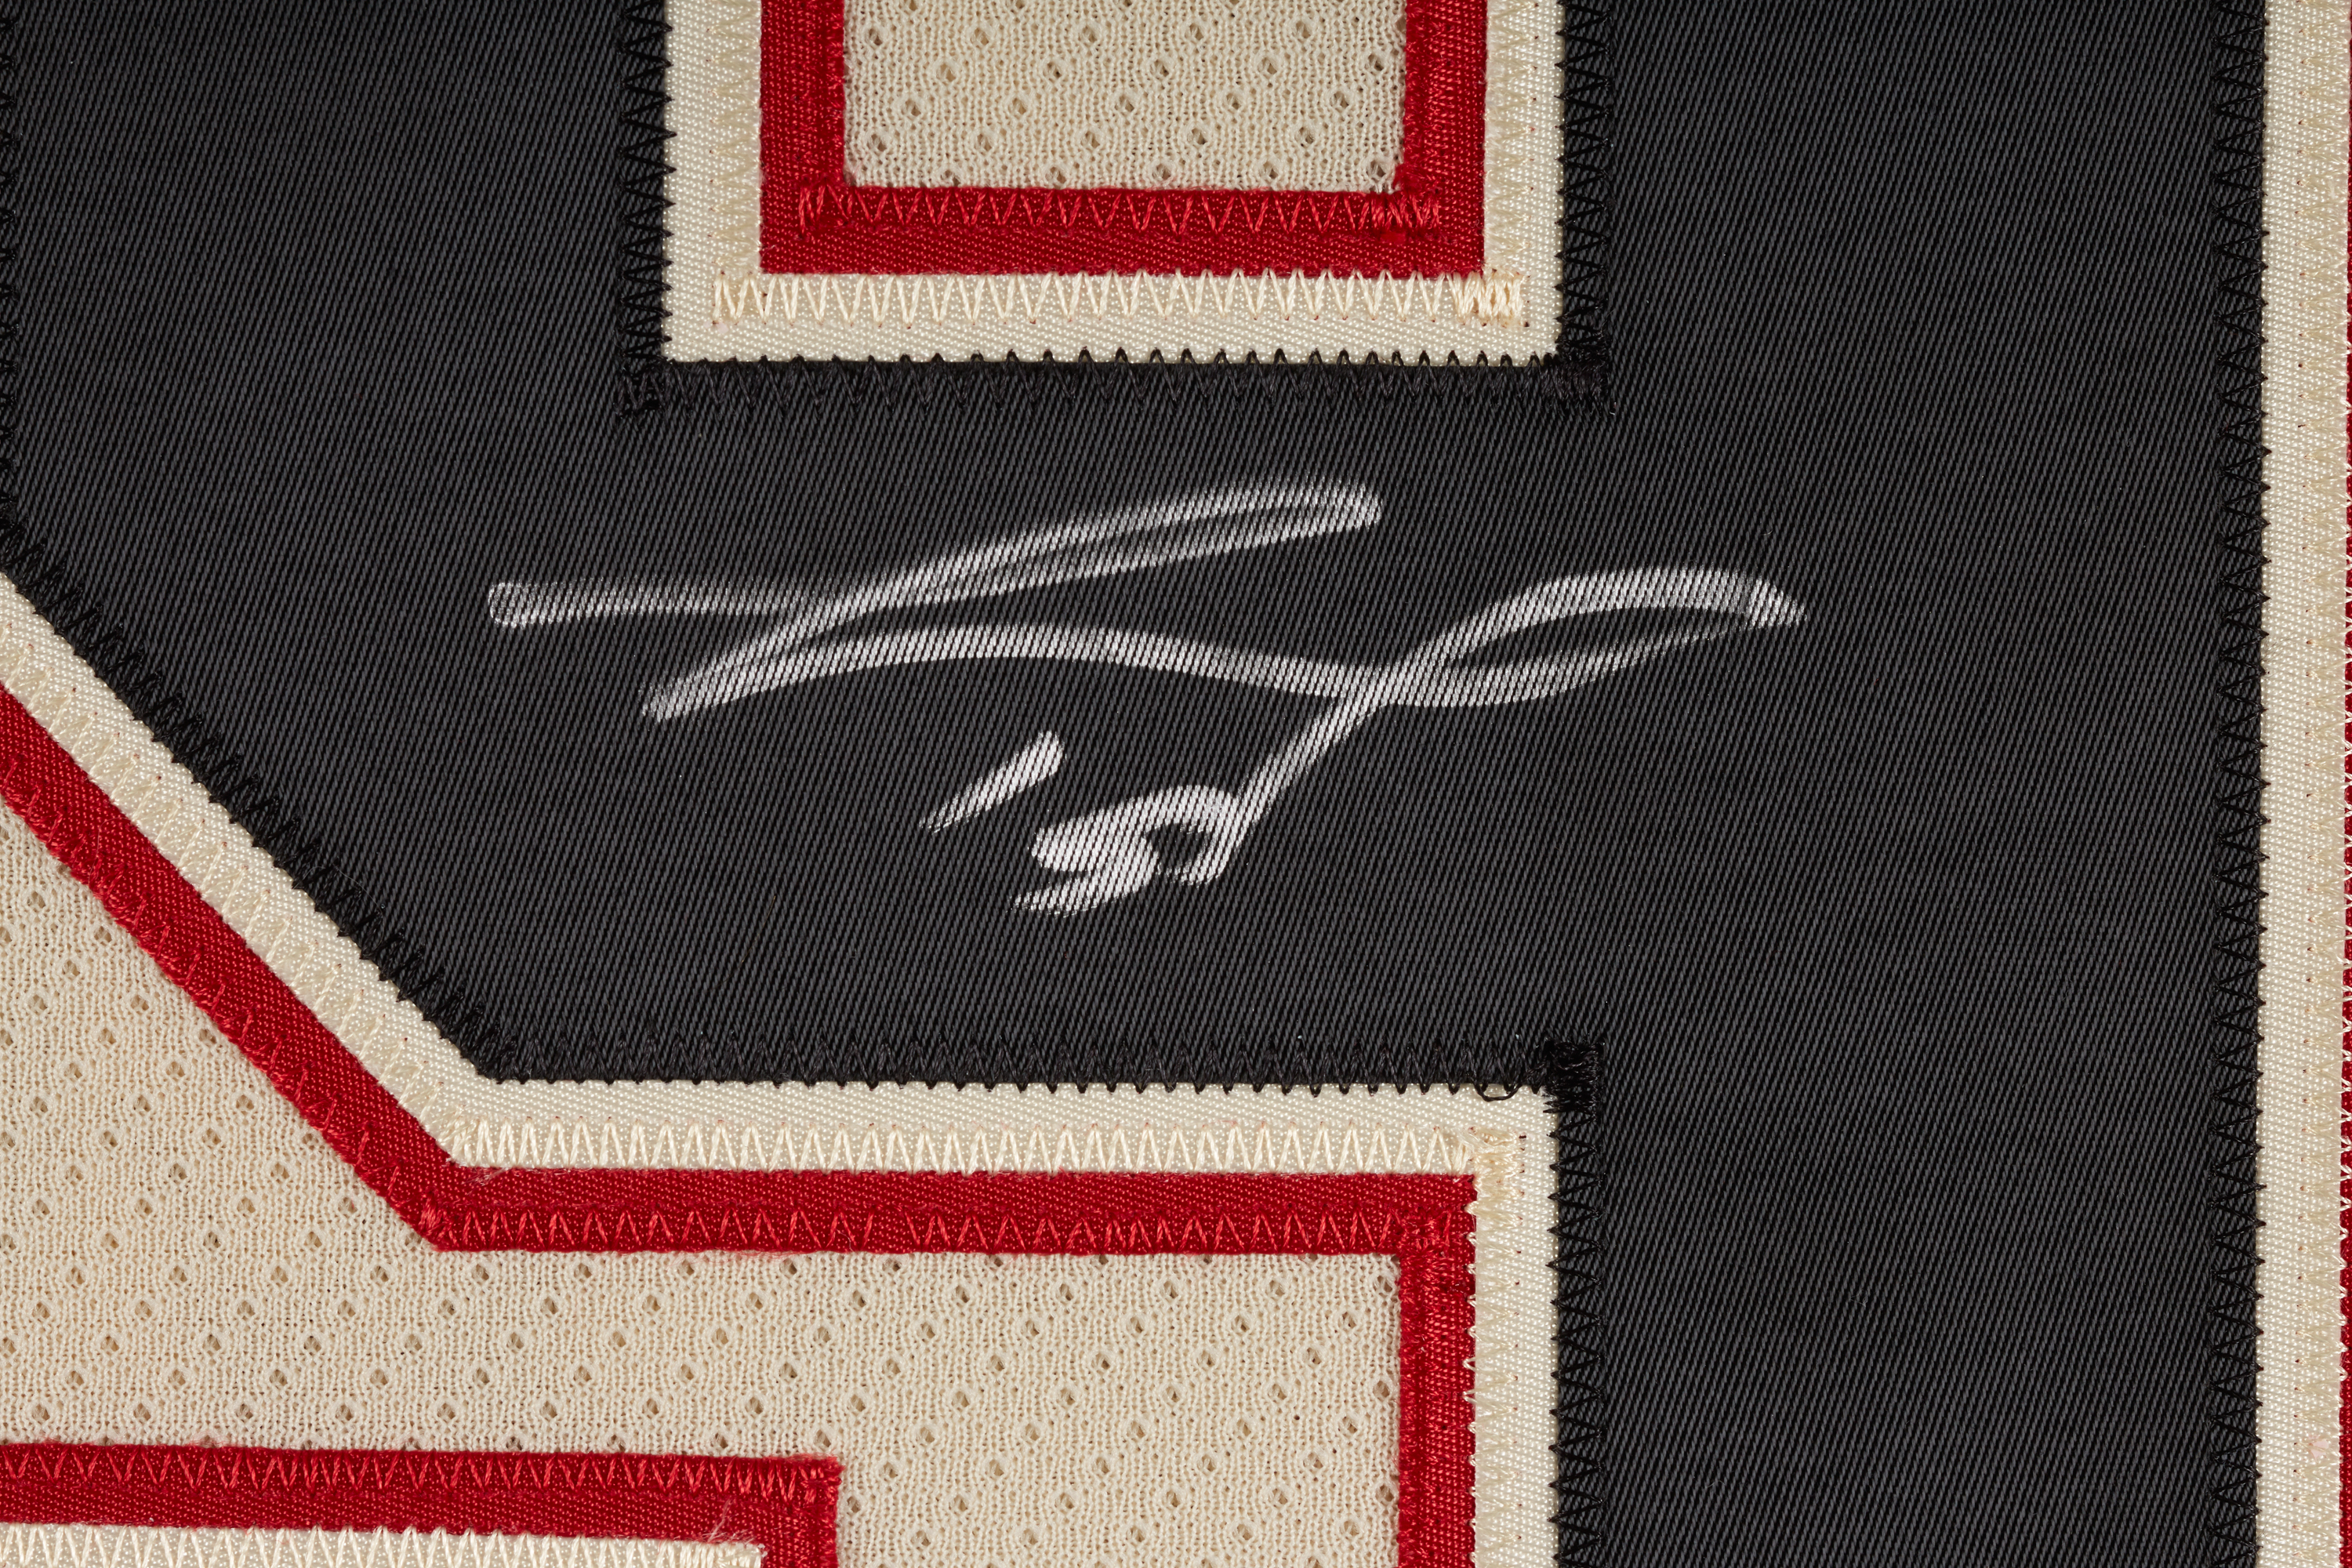 Jonathan Toews Autographed and Framed White Blackhawks Jersey